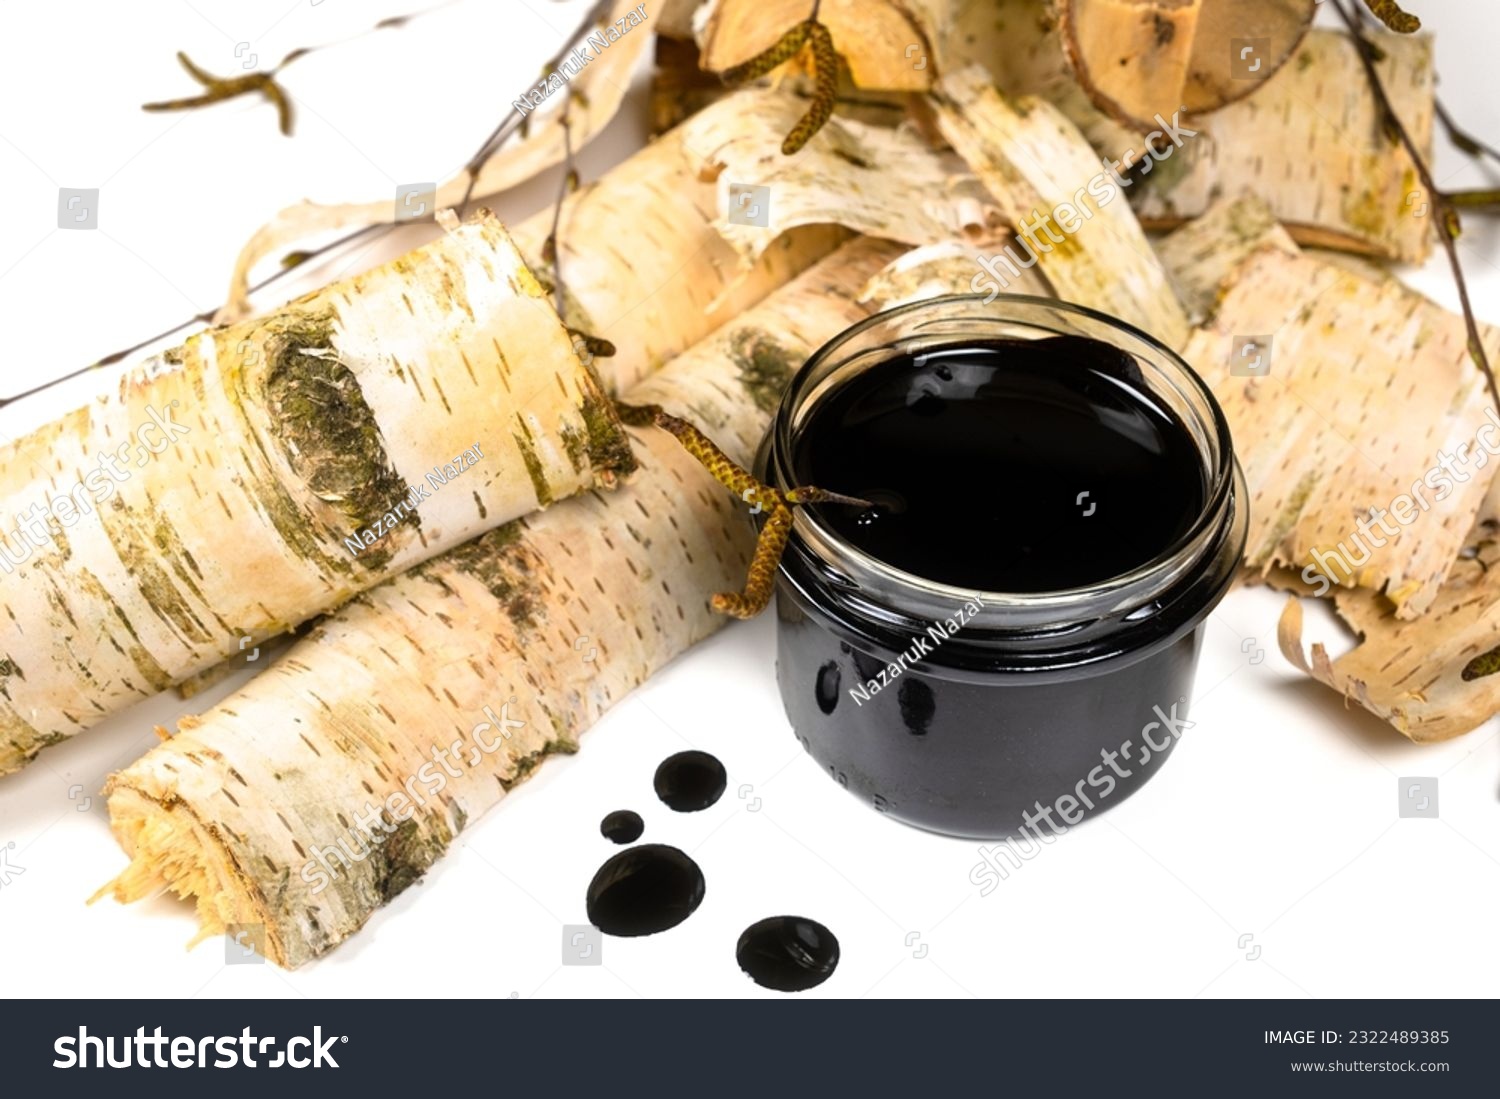 Birch tar or pitch in a jar and birch tree bark on white background. Wood tar. Liquid mineral tar from birch bark #2322489385